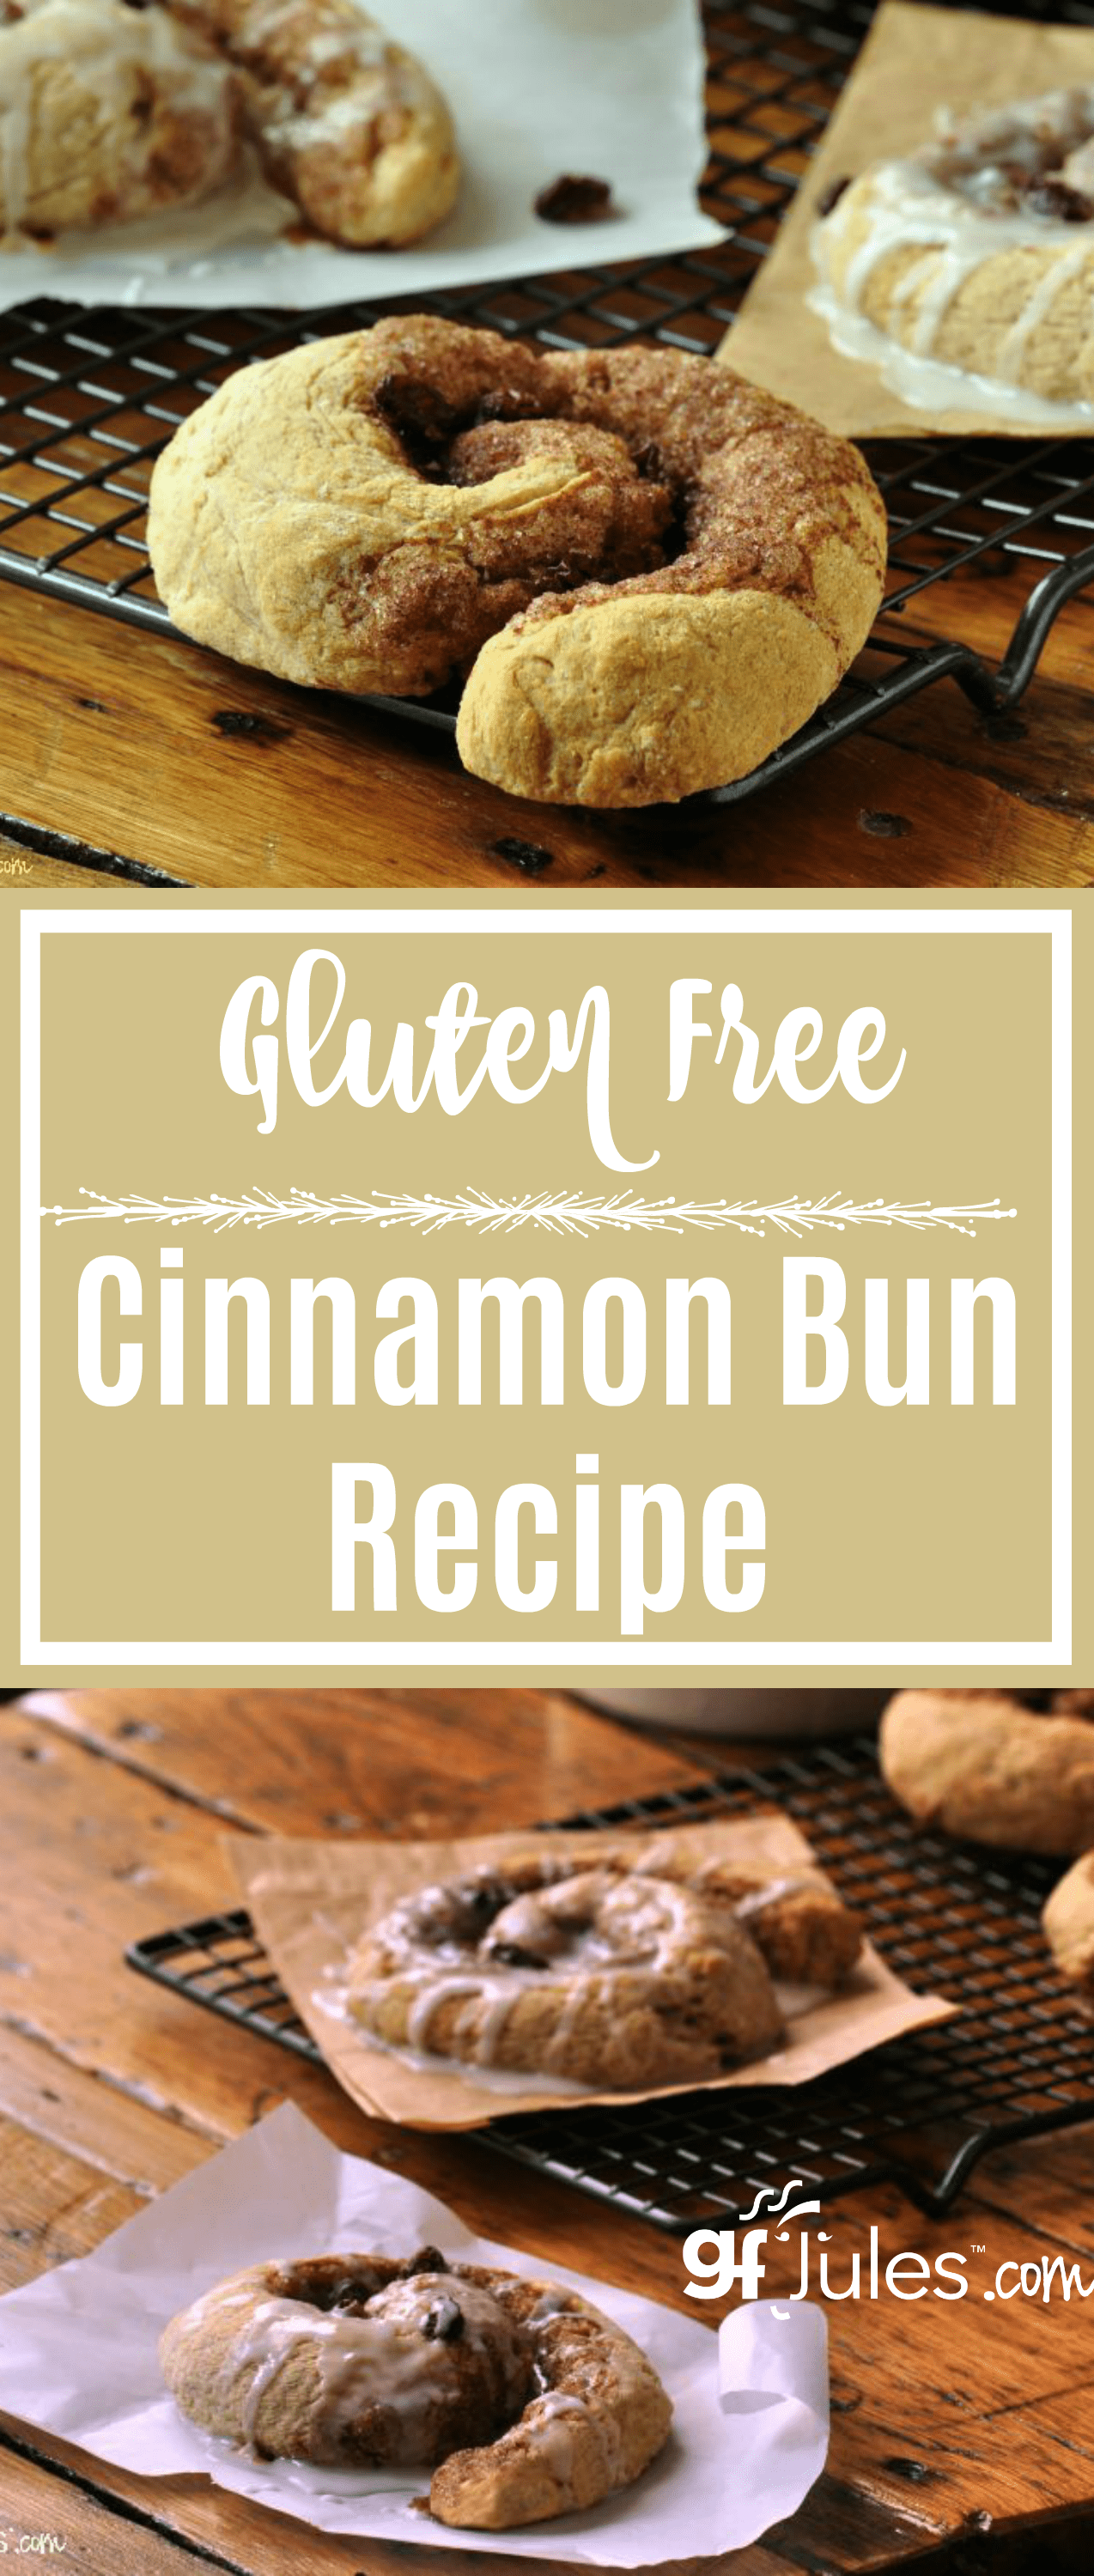 Gluten free cinnamon buns, topped with a sweet confectioner's sugar glaze ... this simple recipe will bring a favorite treat back to your breakfast table!